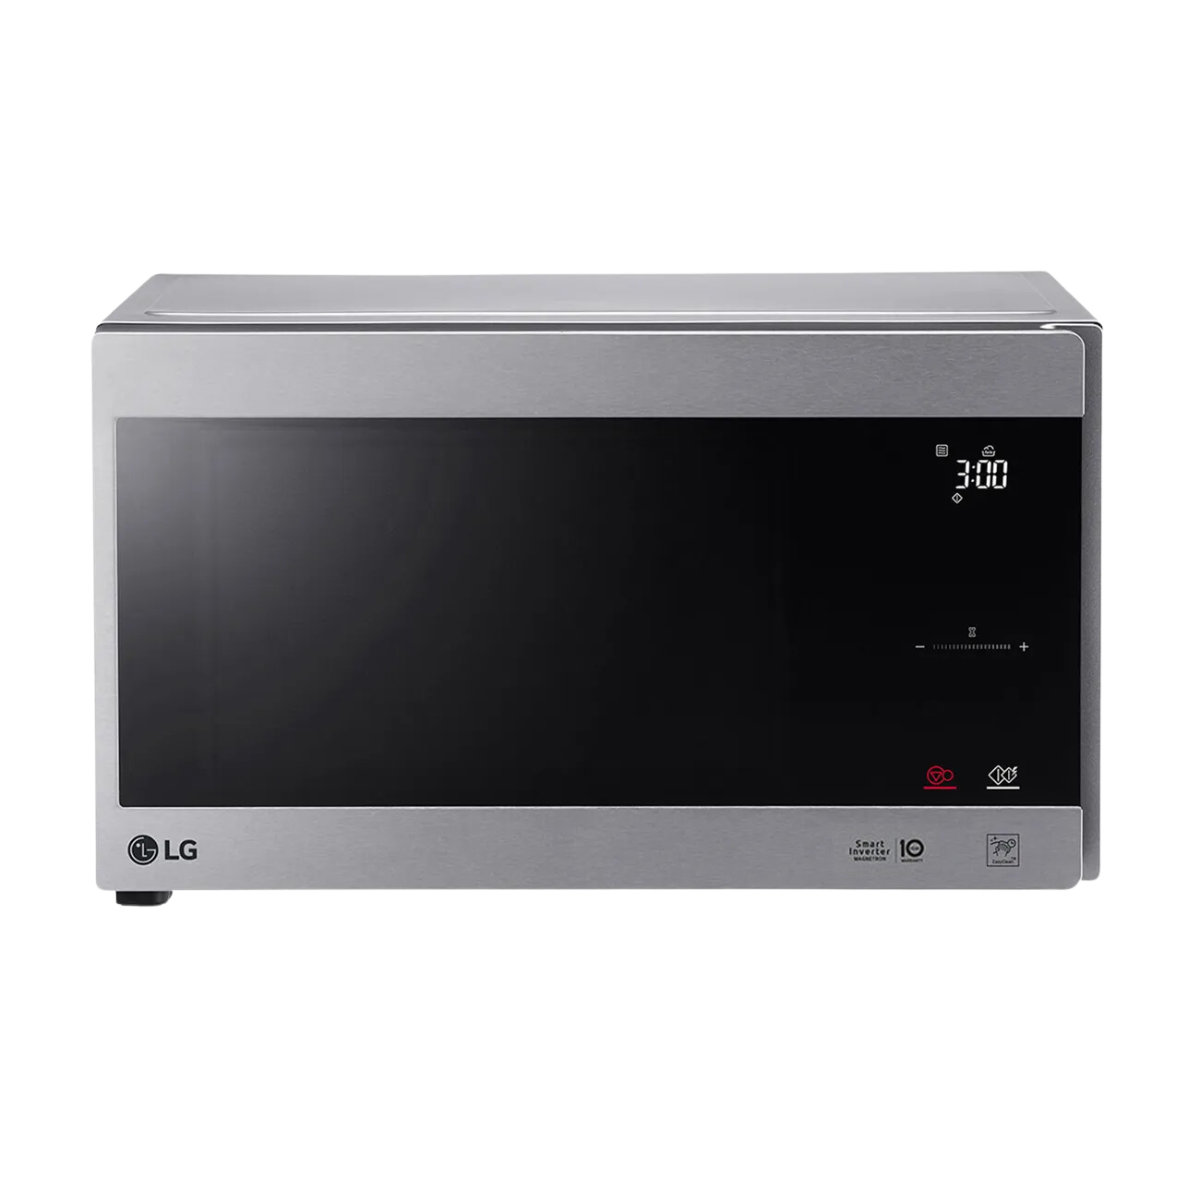 LG MS4295CIS MICROWAVE OVEN 42L SILVER FINISH